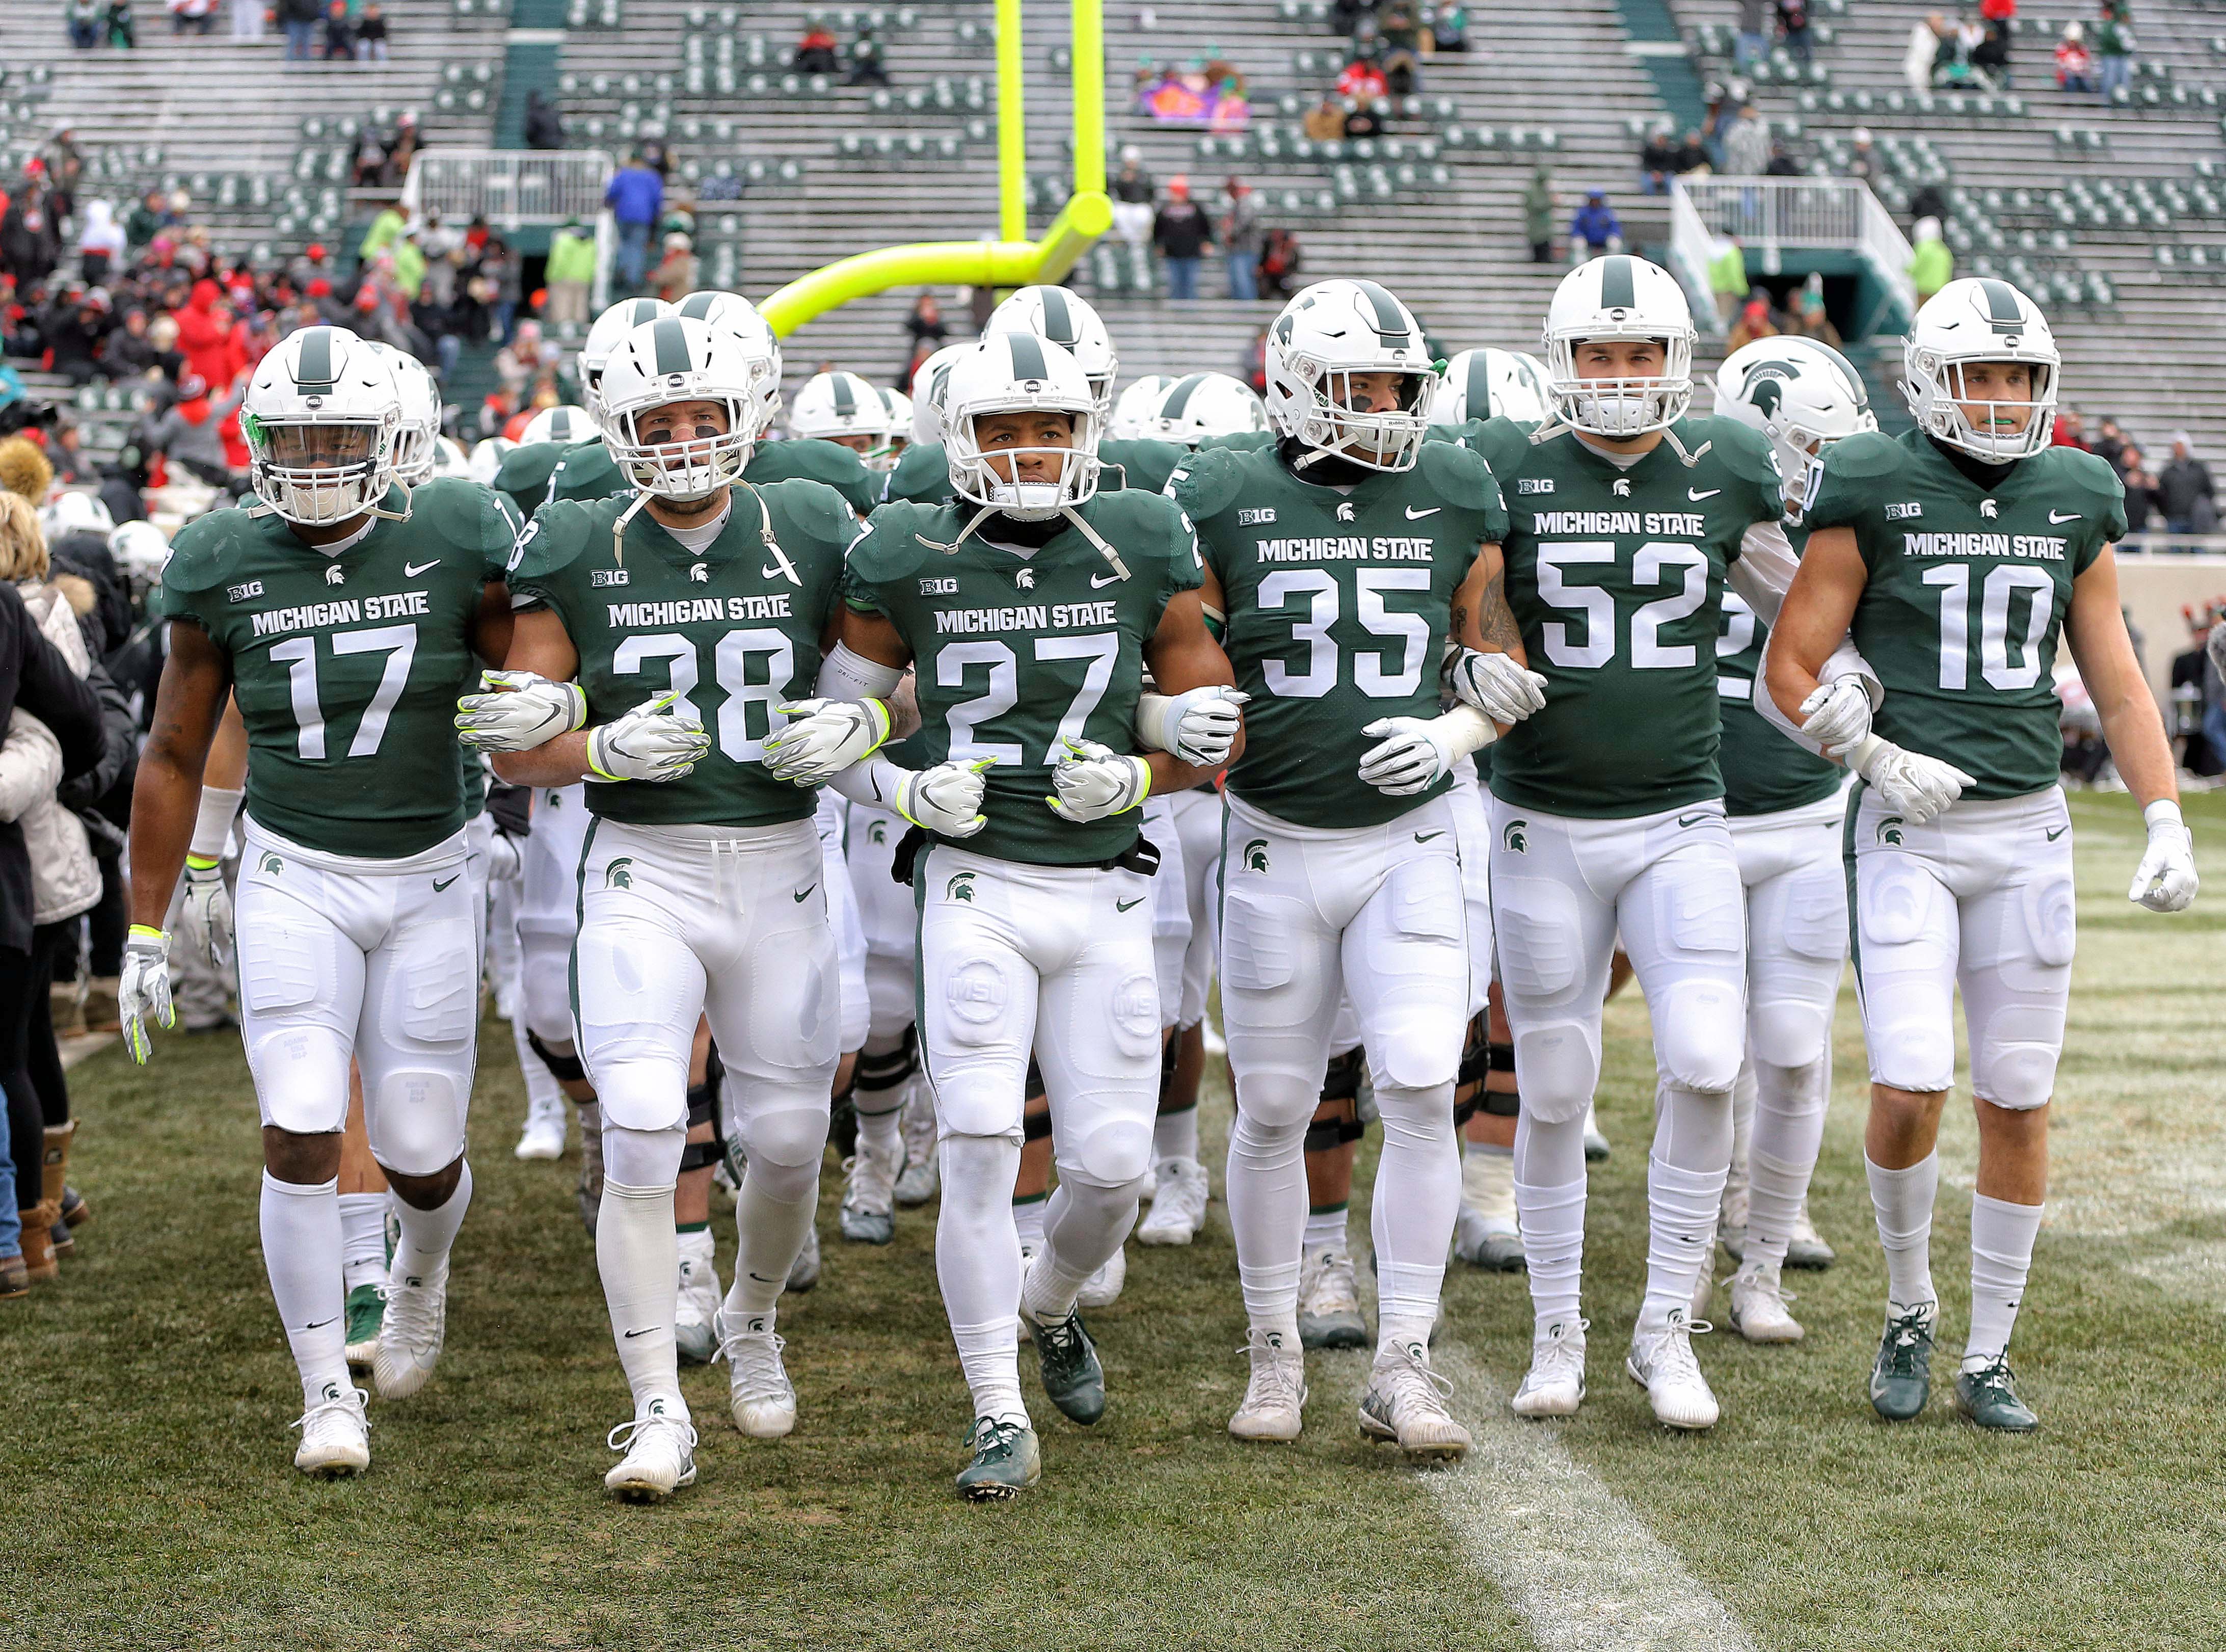 MSU football team headed to Final Four to support Spartan hoops